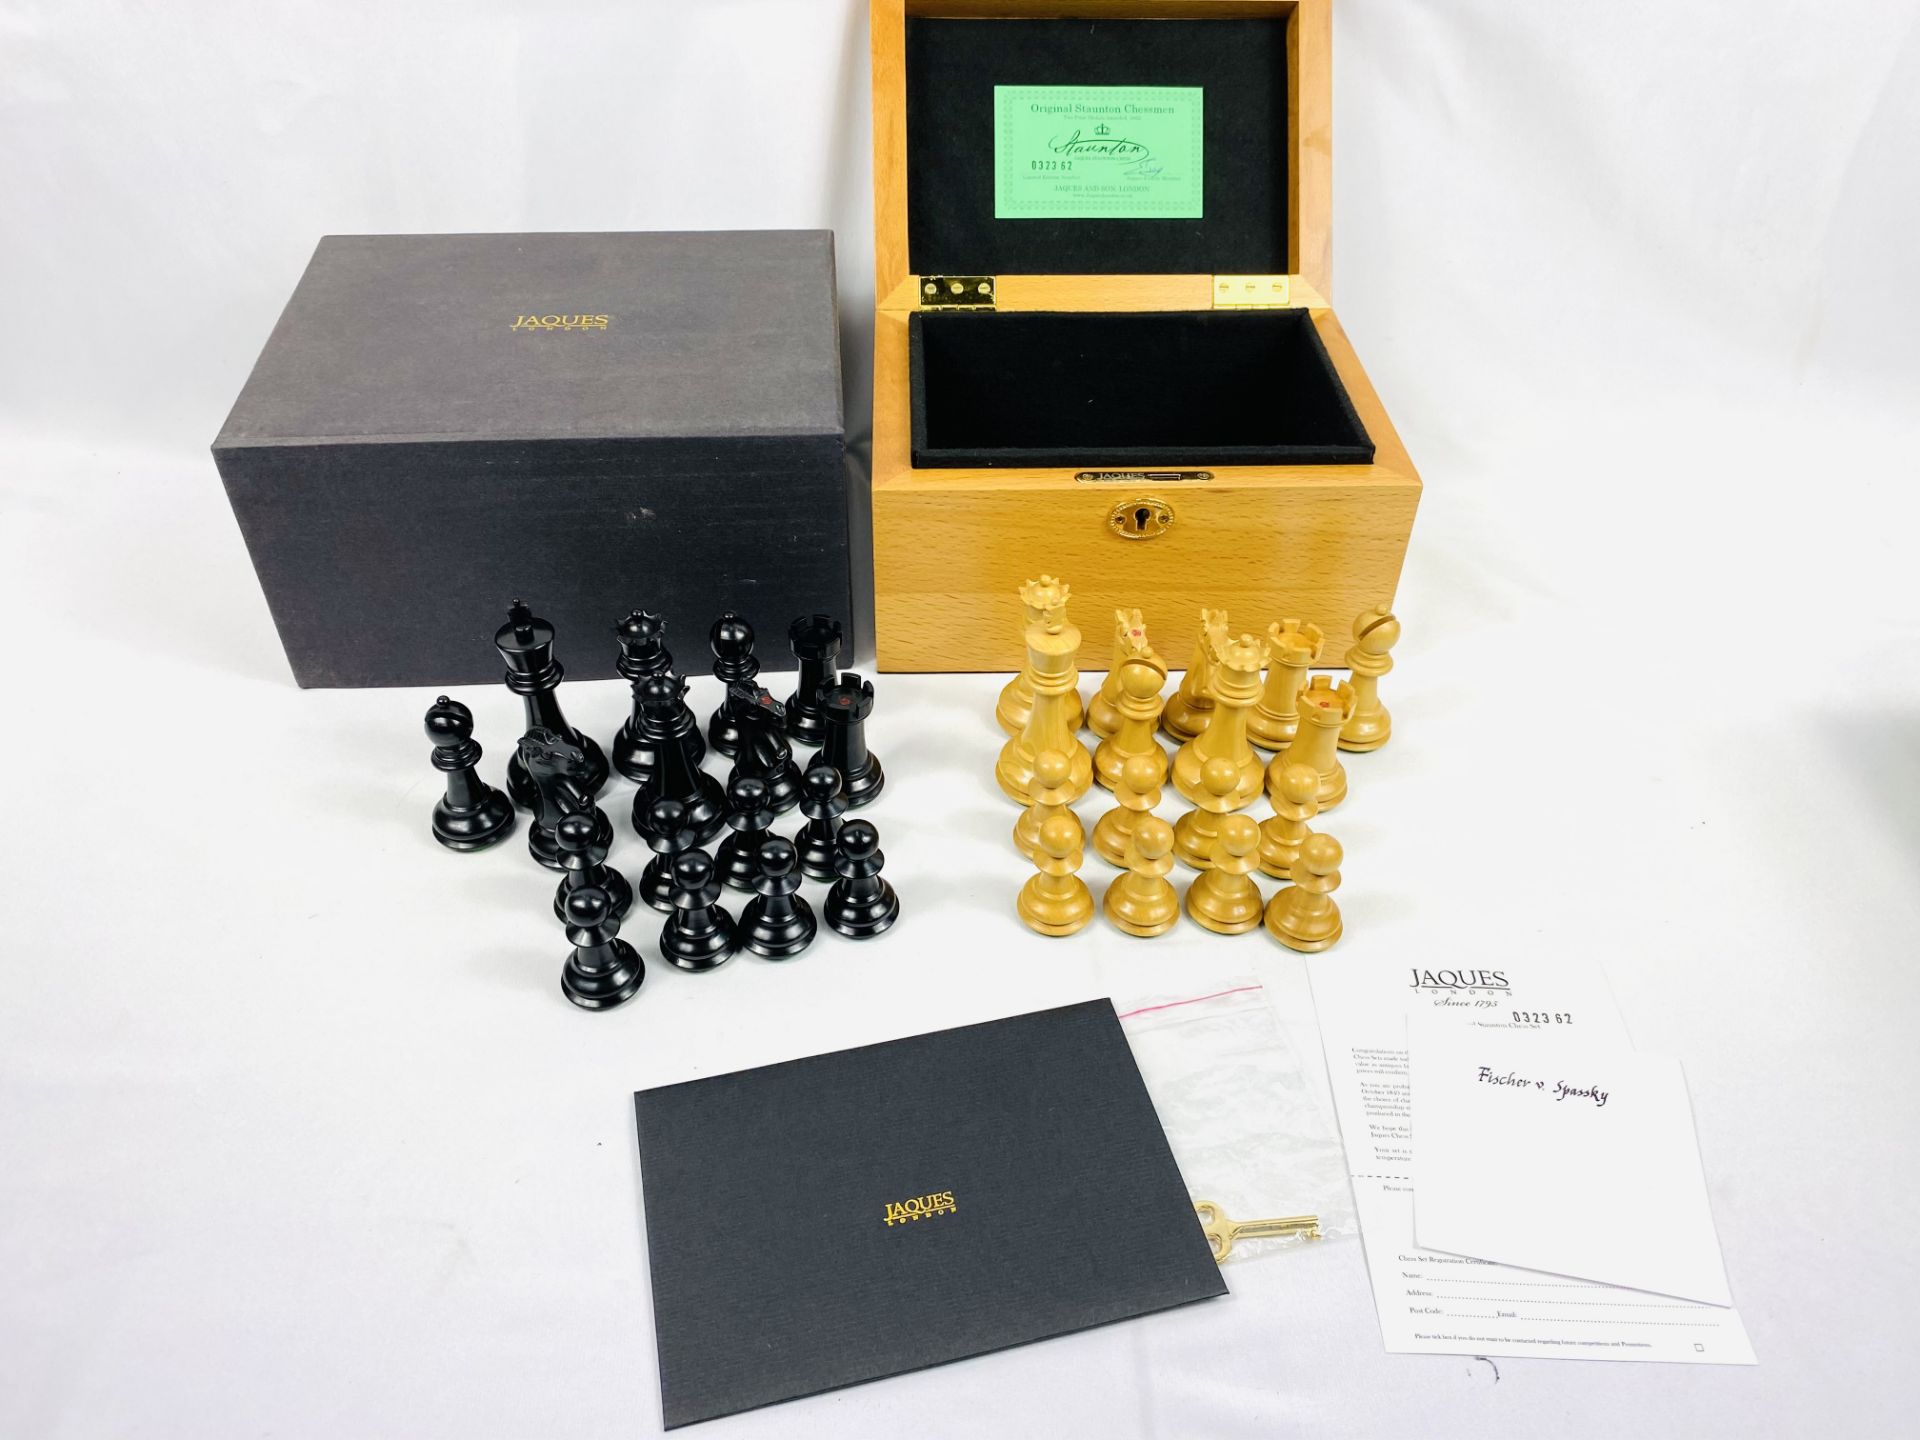 Jaques of London Staunton style chess set